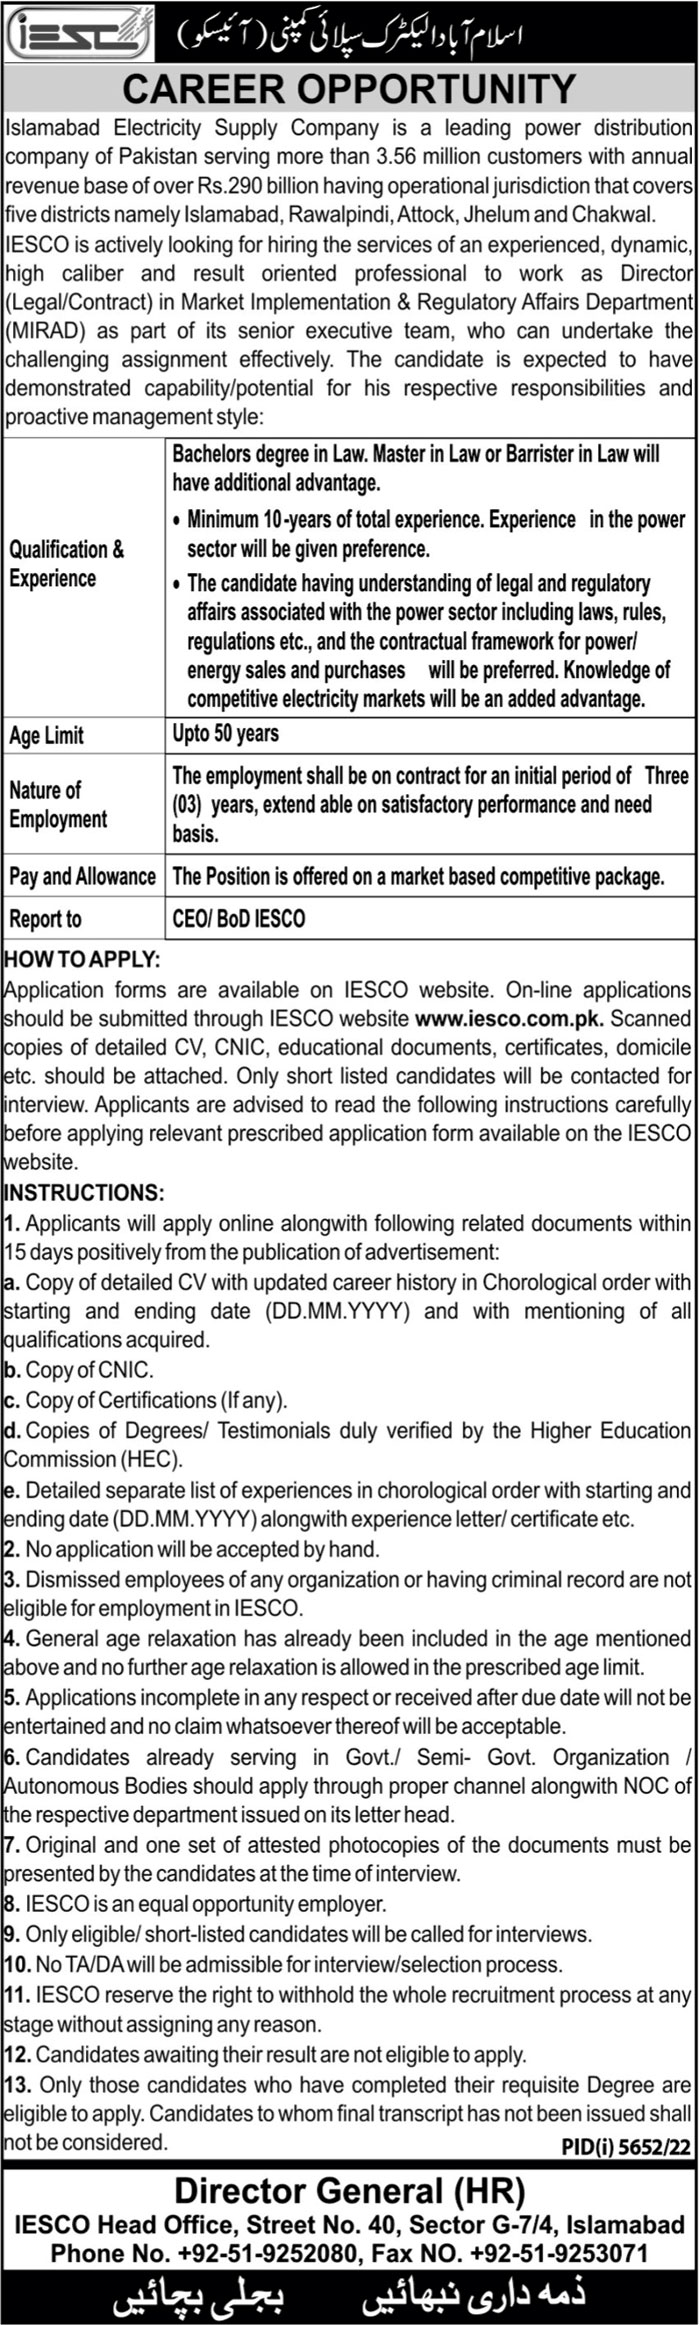 Islamabad Electric Supply Company IESCO Federal Govt Jobs